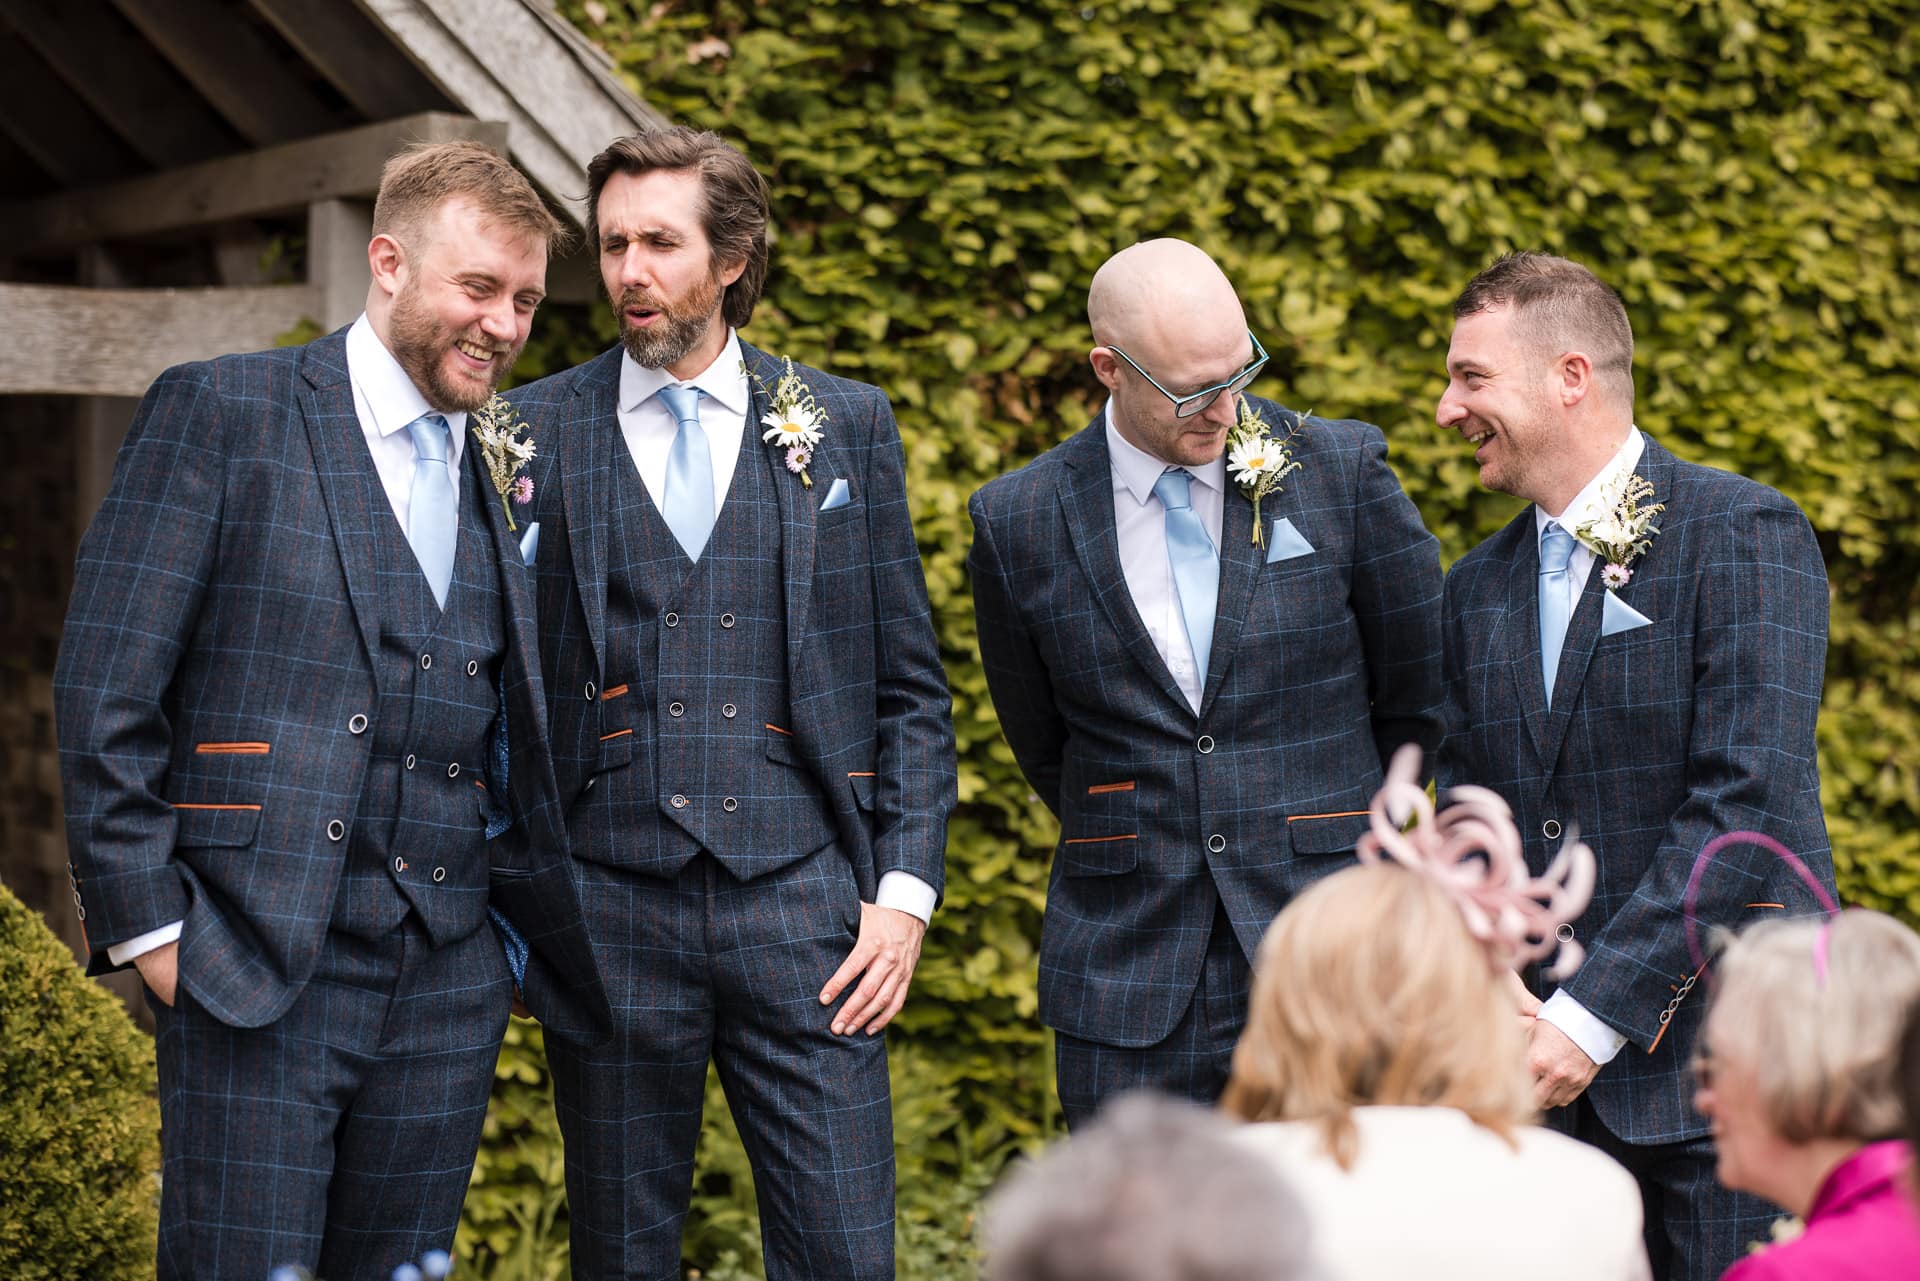 The Groom and the Groomsmen having a last minute laugh before the Ceremony.